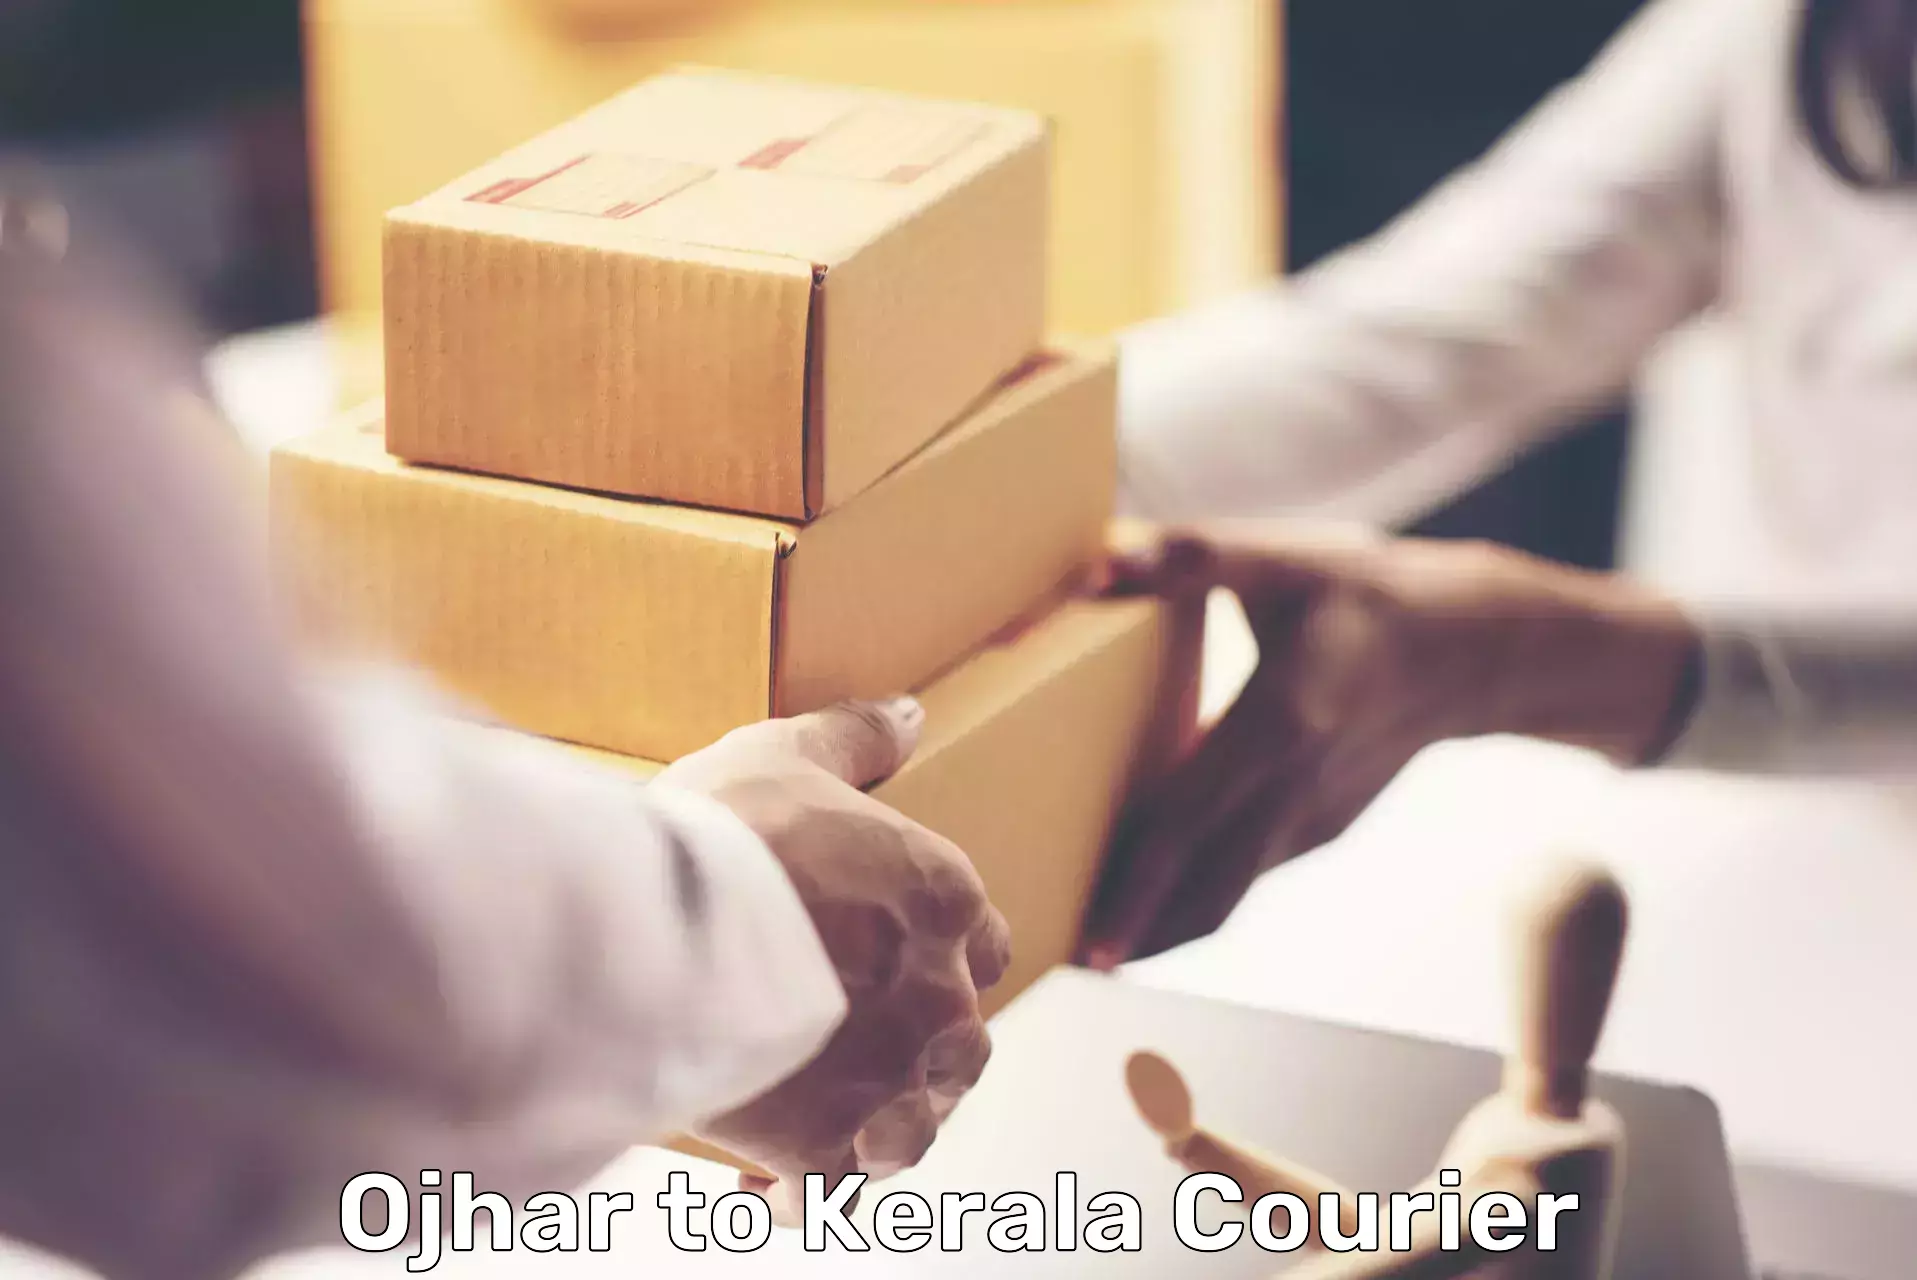 Sustainable shipping practices Ojhar to Kerala